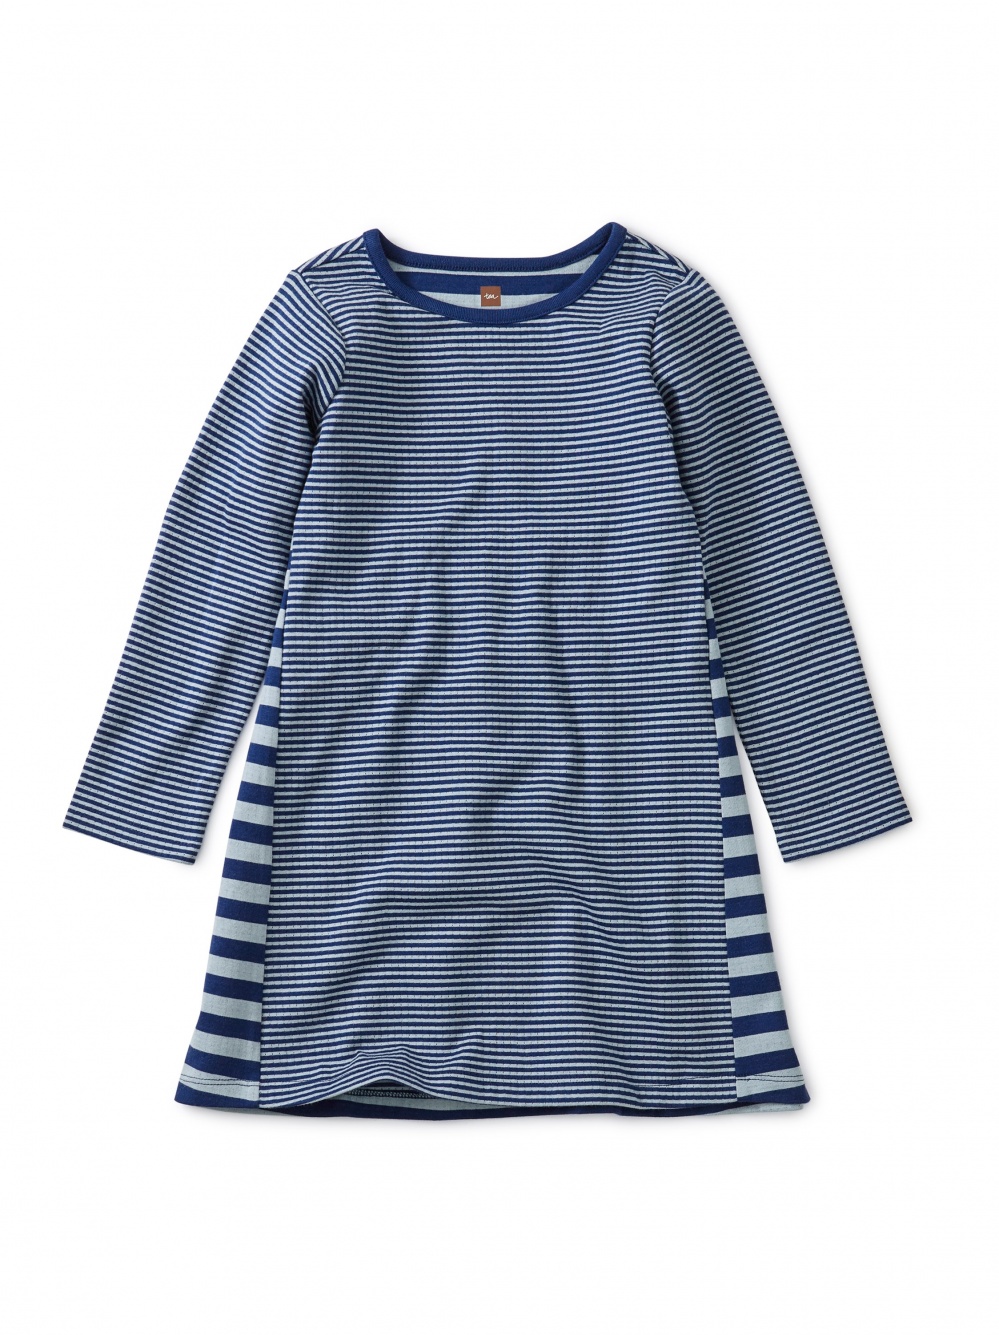 Striped Double Knit Dress | Tea Collection